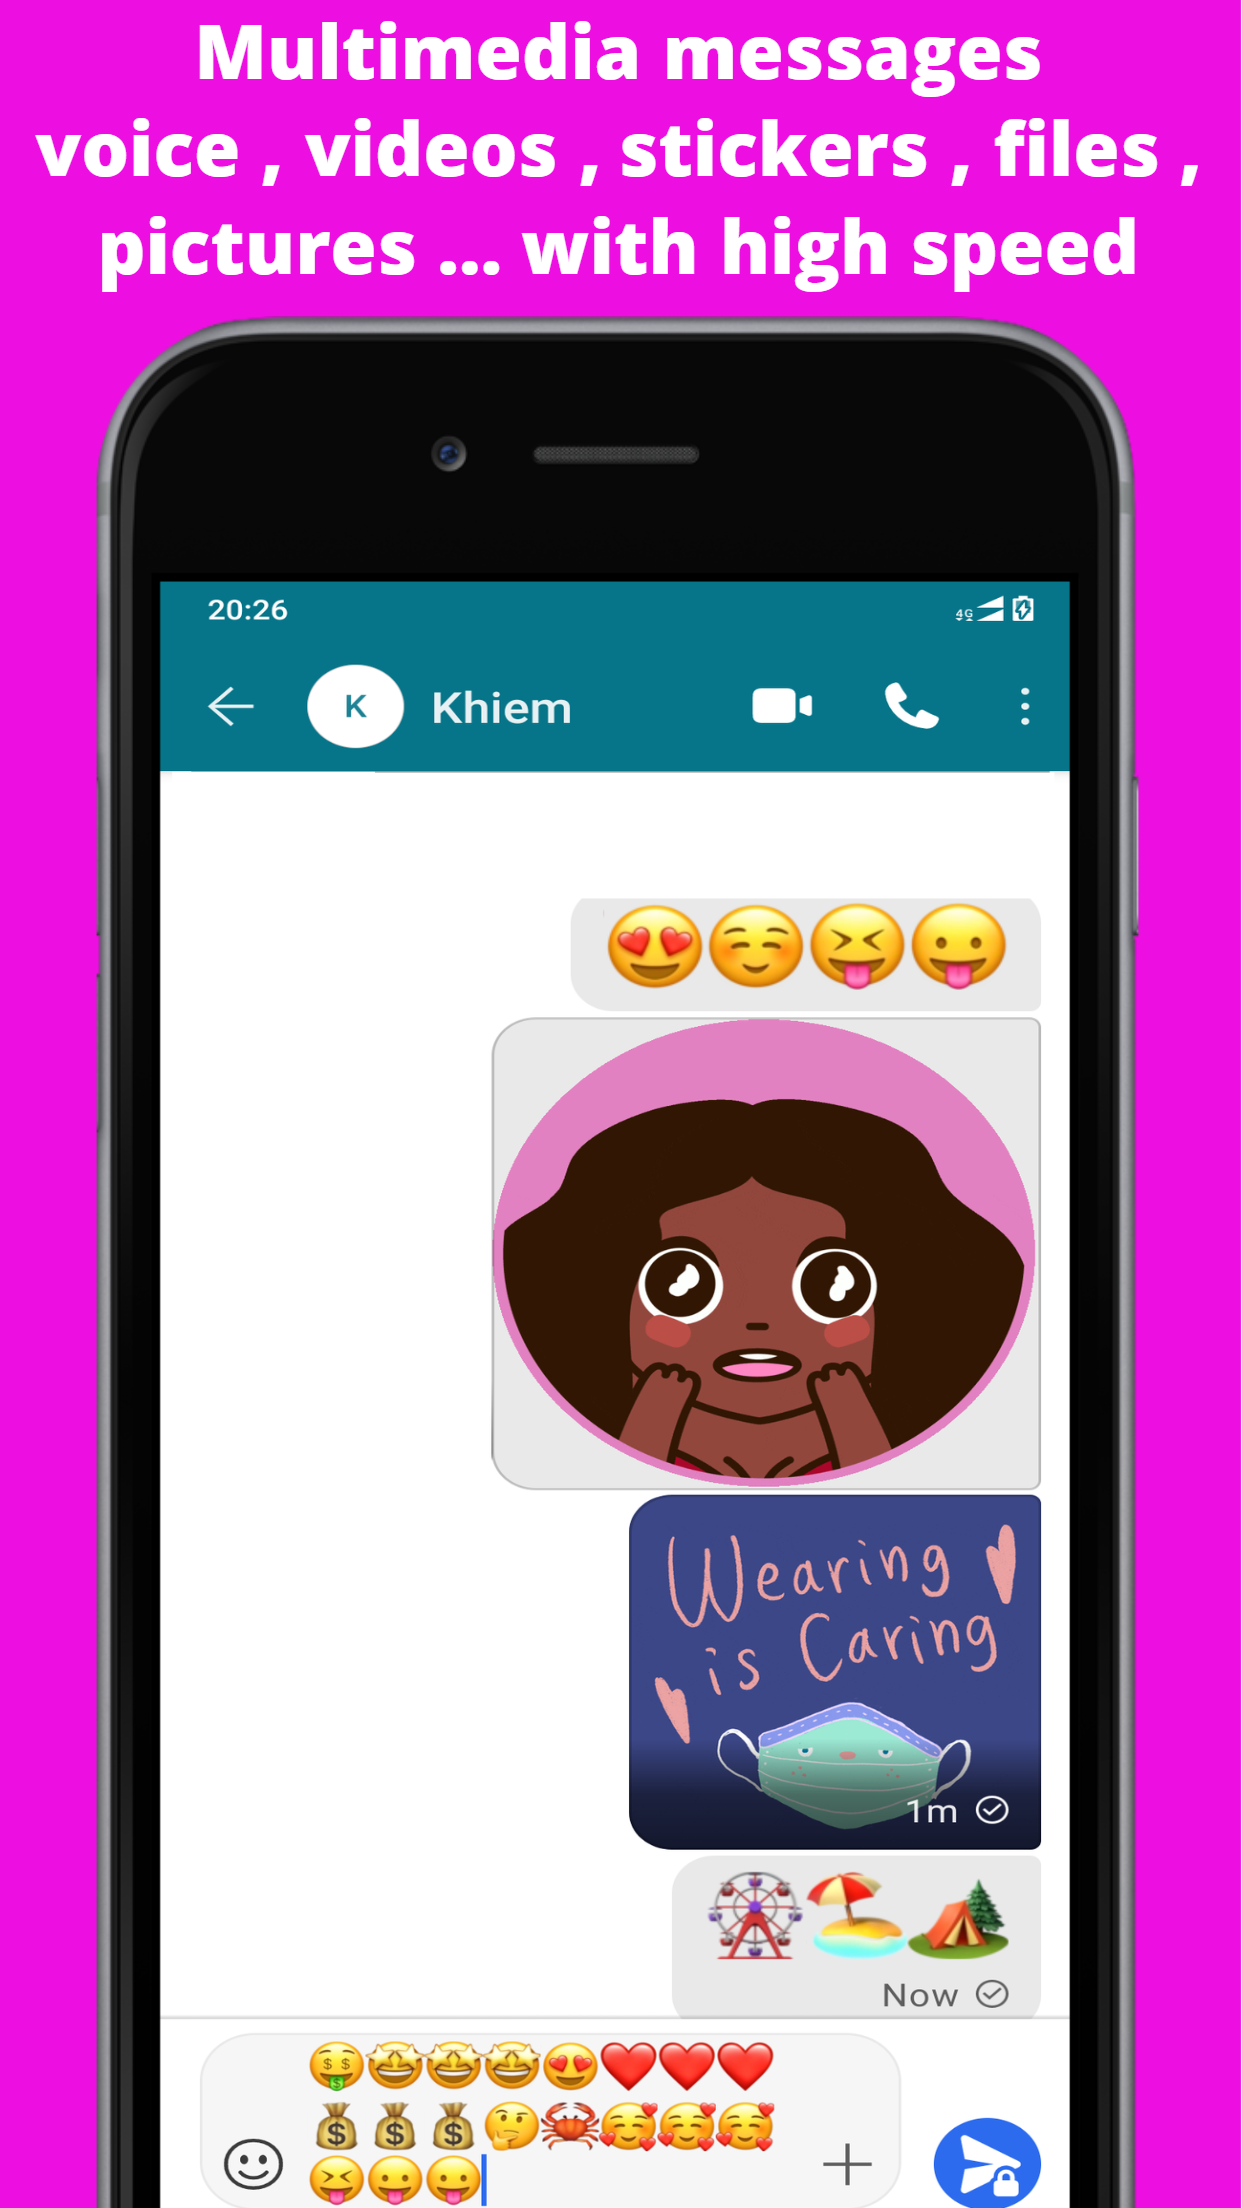 Free Video call - Chat messages app